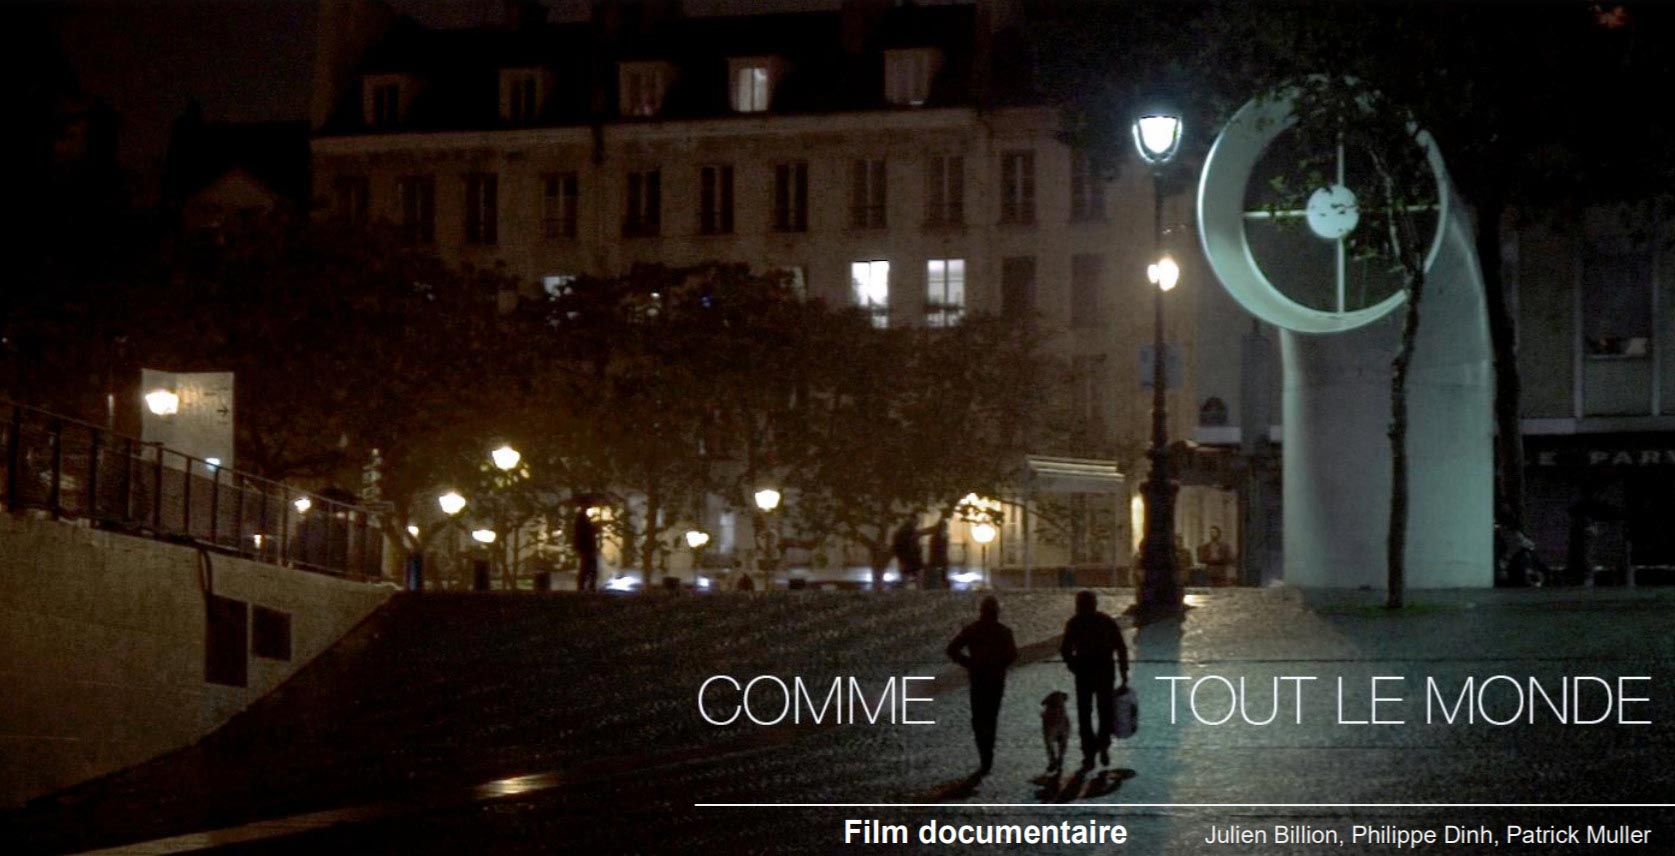 The documentary Comme tout le monde (2017) by Philippe Garnier teaching at Autograf and his two collaborators Julien Billion and Patrick Muller will be broadcast on LCP on Saturday 6th February